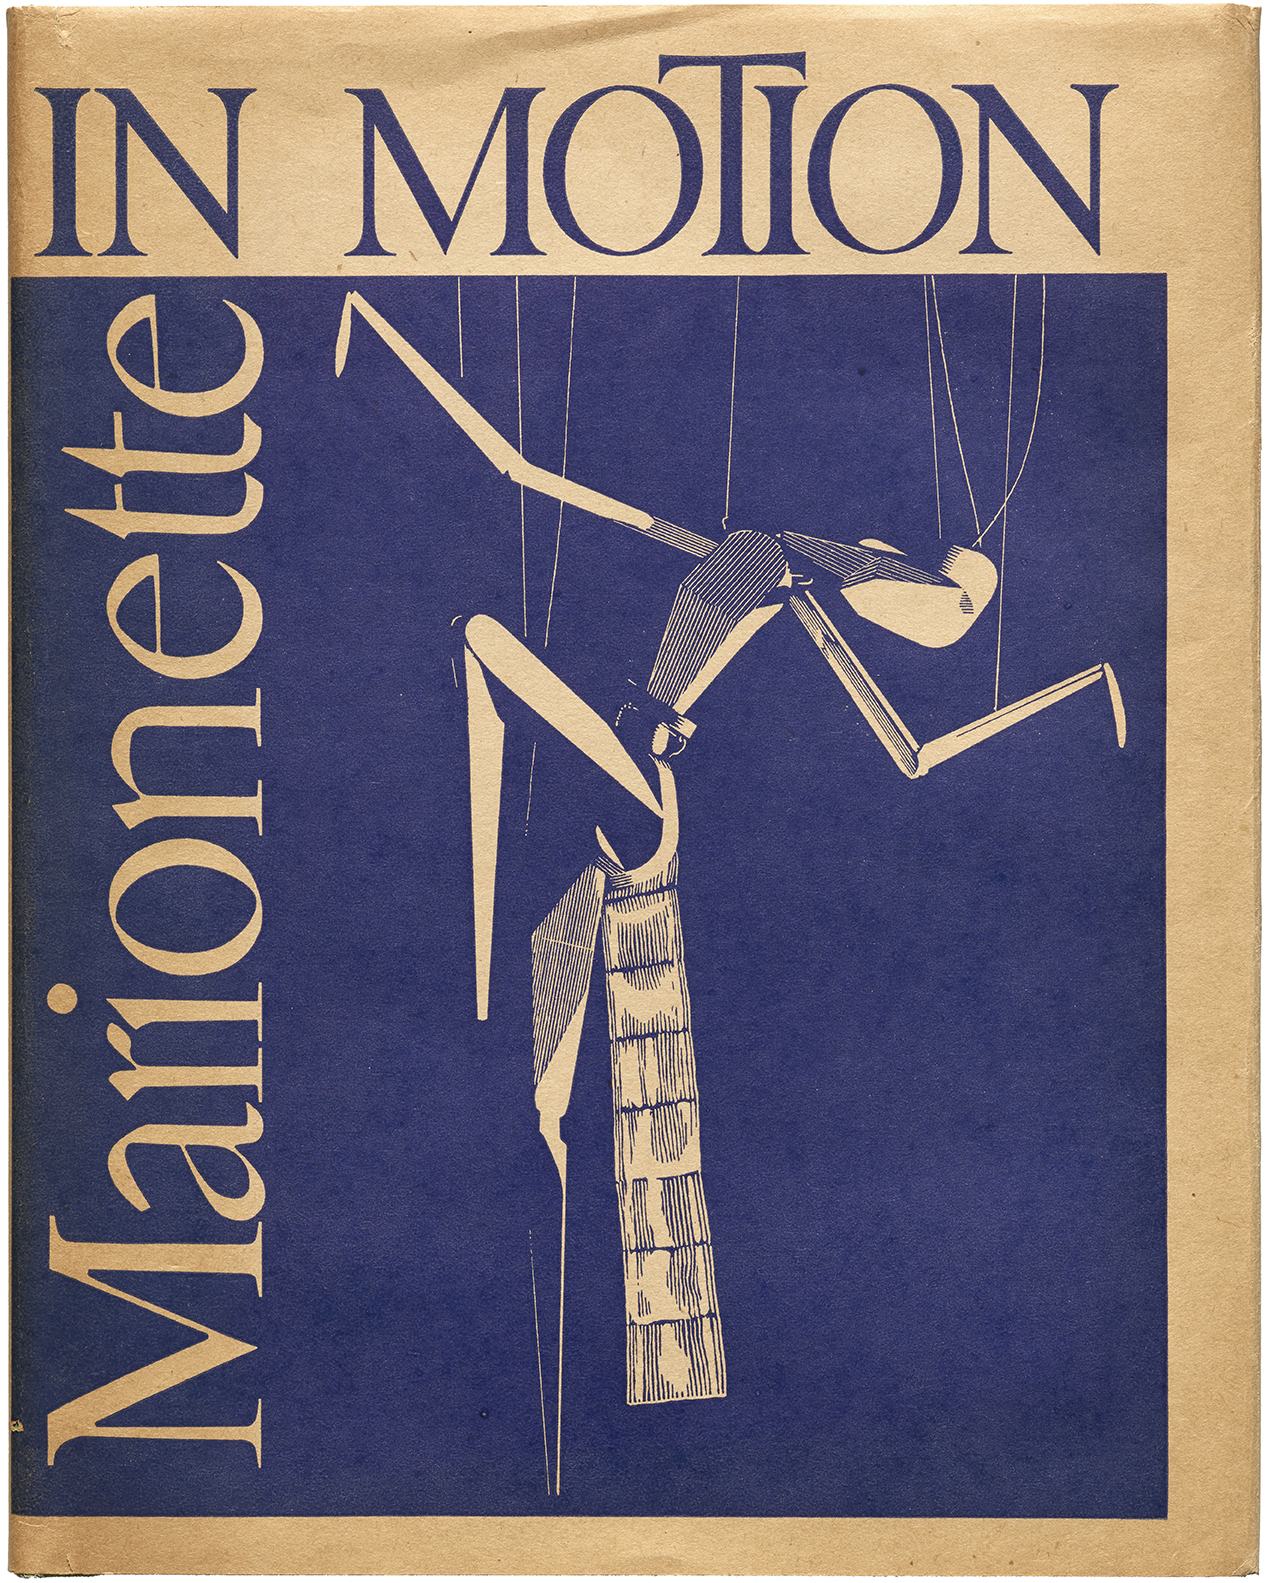  Cover for Marionette in Motion: The Püterschein System Diagrammed, Described (Detroit: Puppetry Imprints, 1939). Collection of Letterform Archive. 